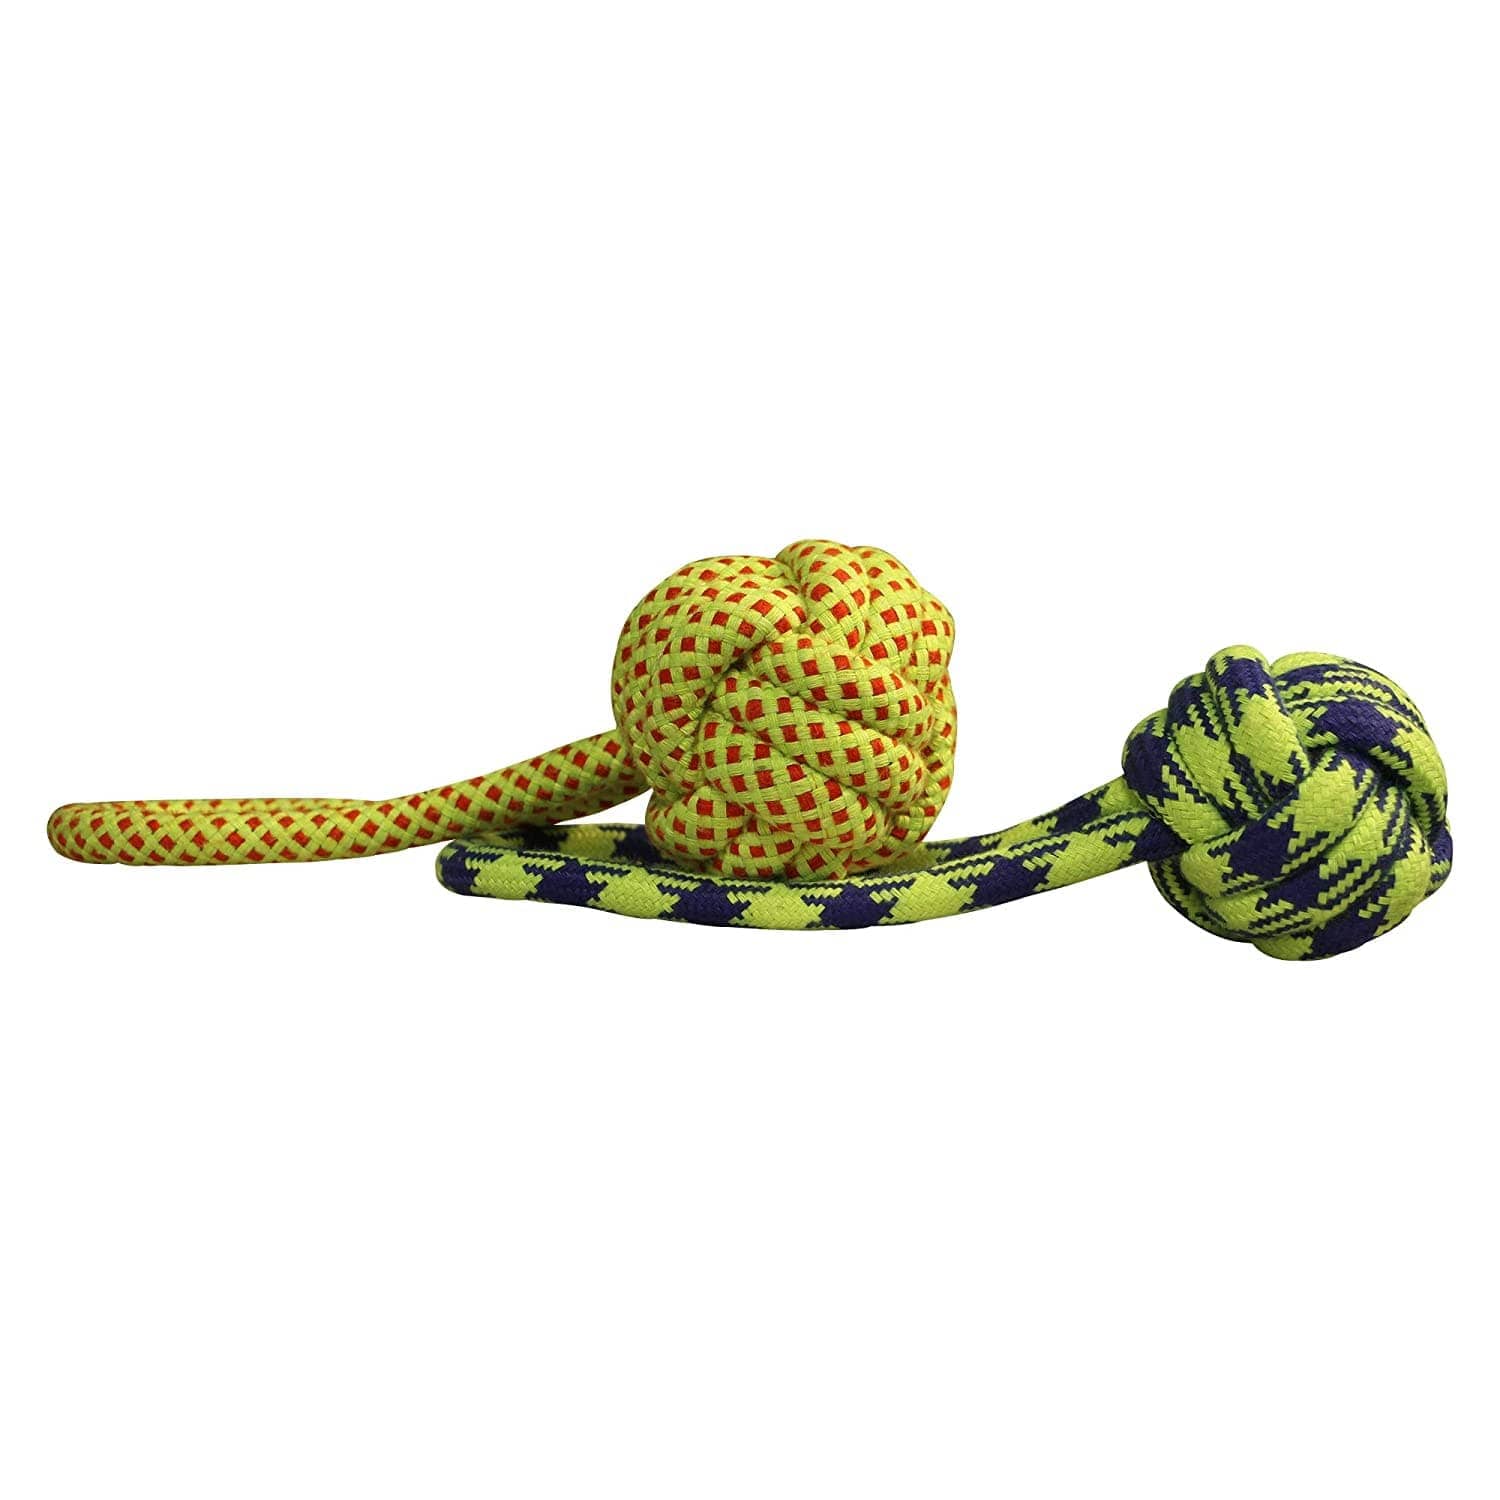 Hiputee Knotted Durable Big Handle Ball Teething Rope Toy for Dogs